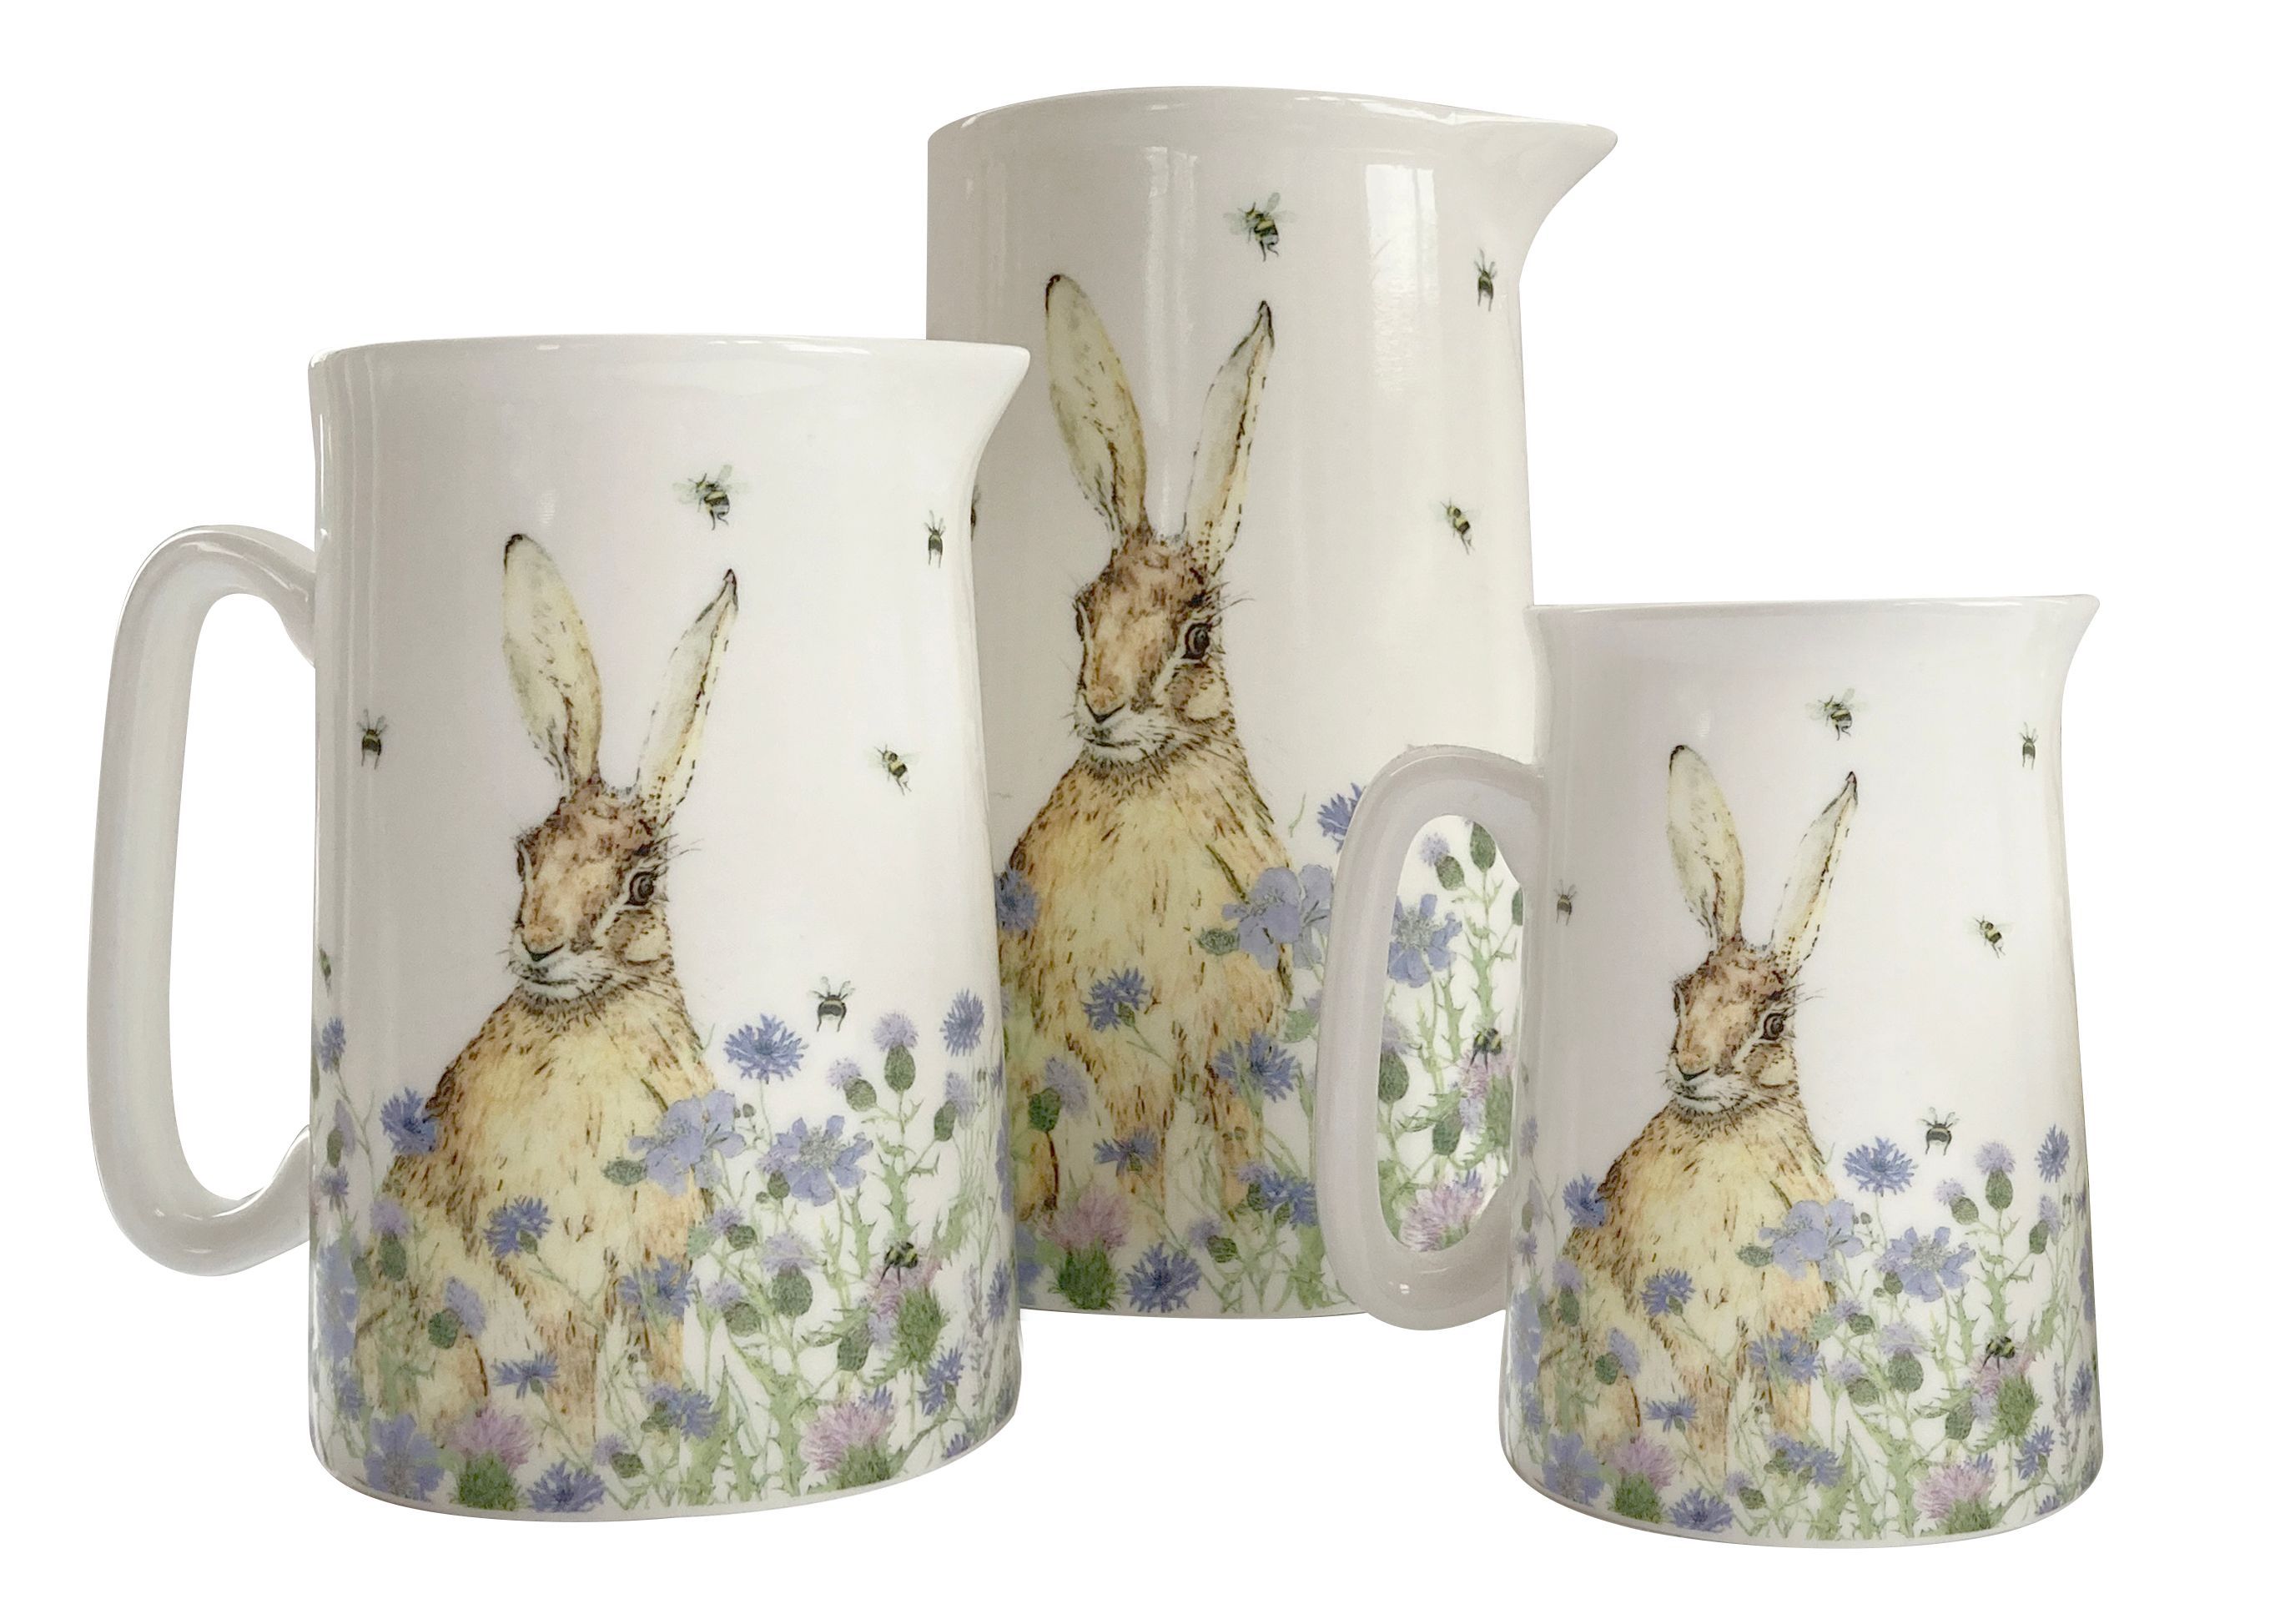 Hare and Wildflower: Launching at Spring Fair